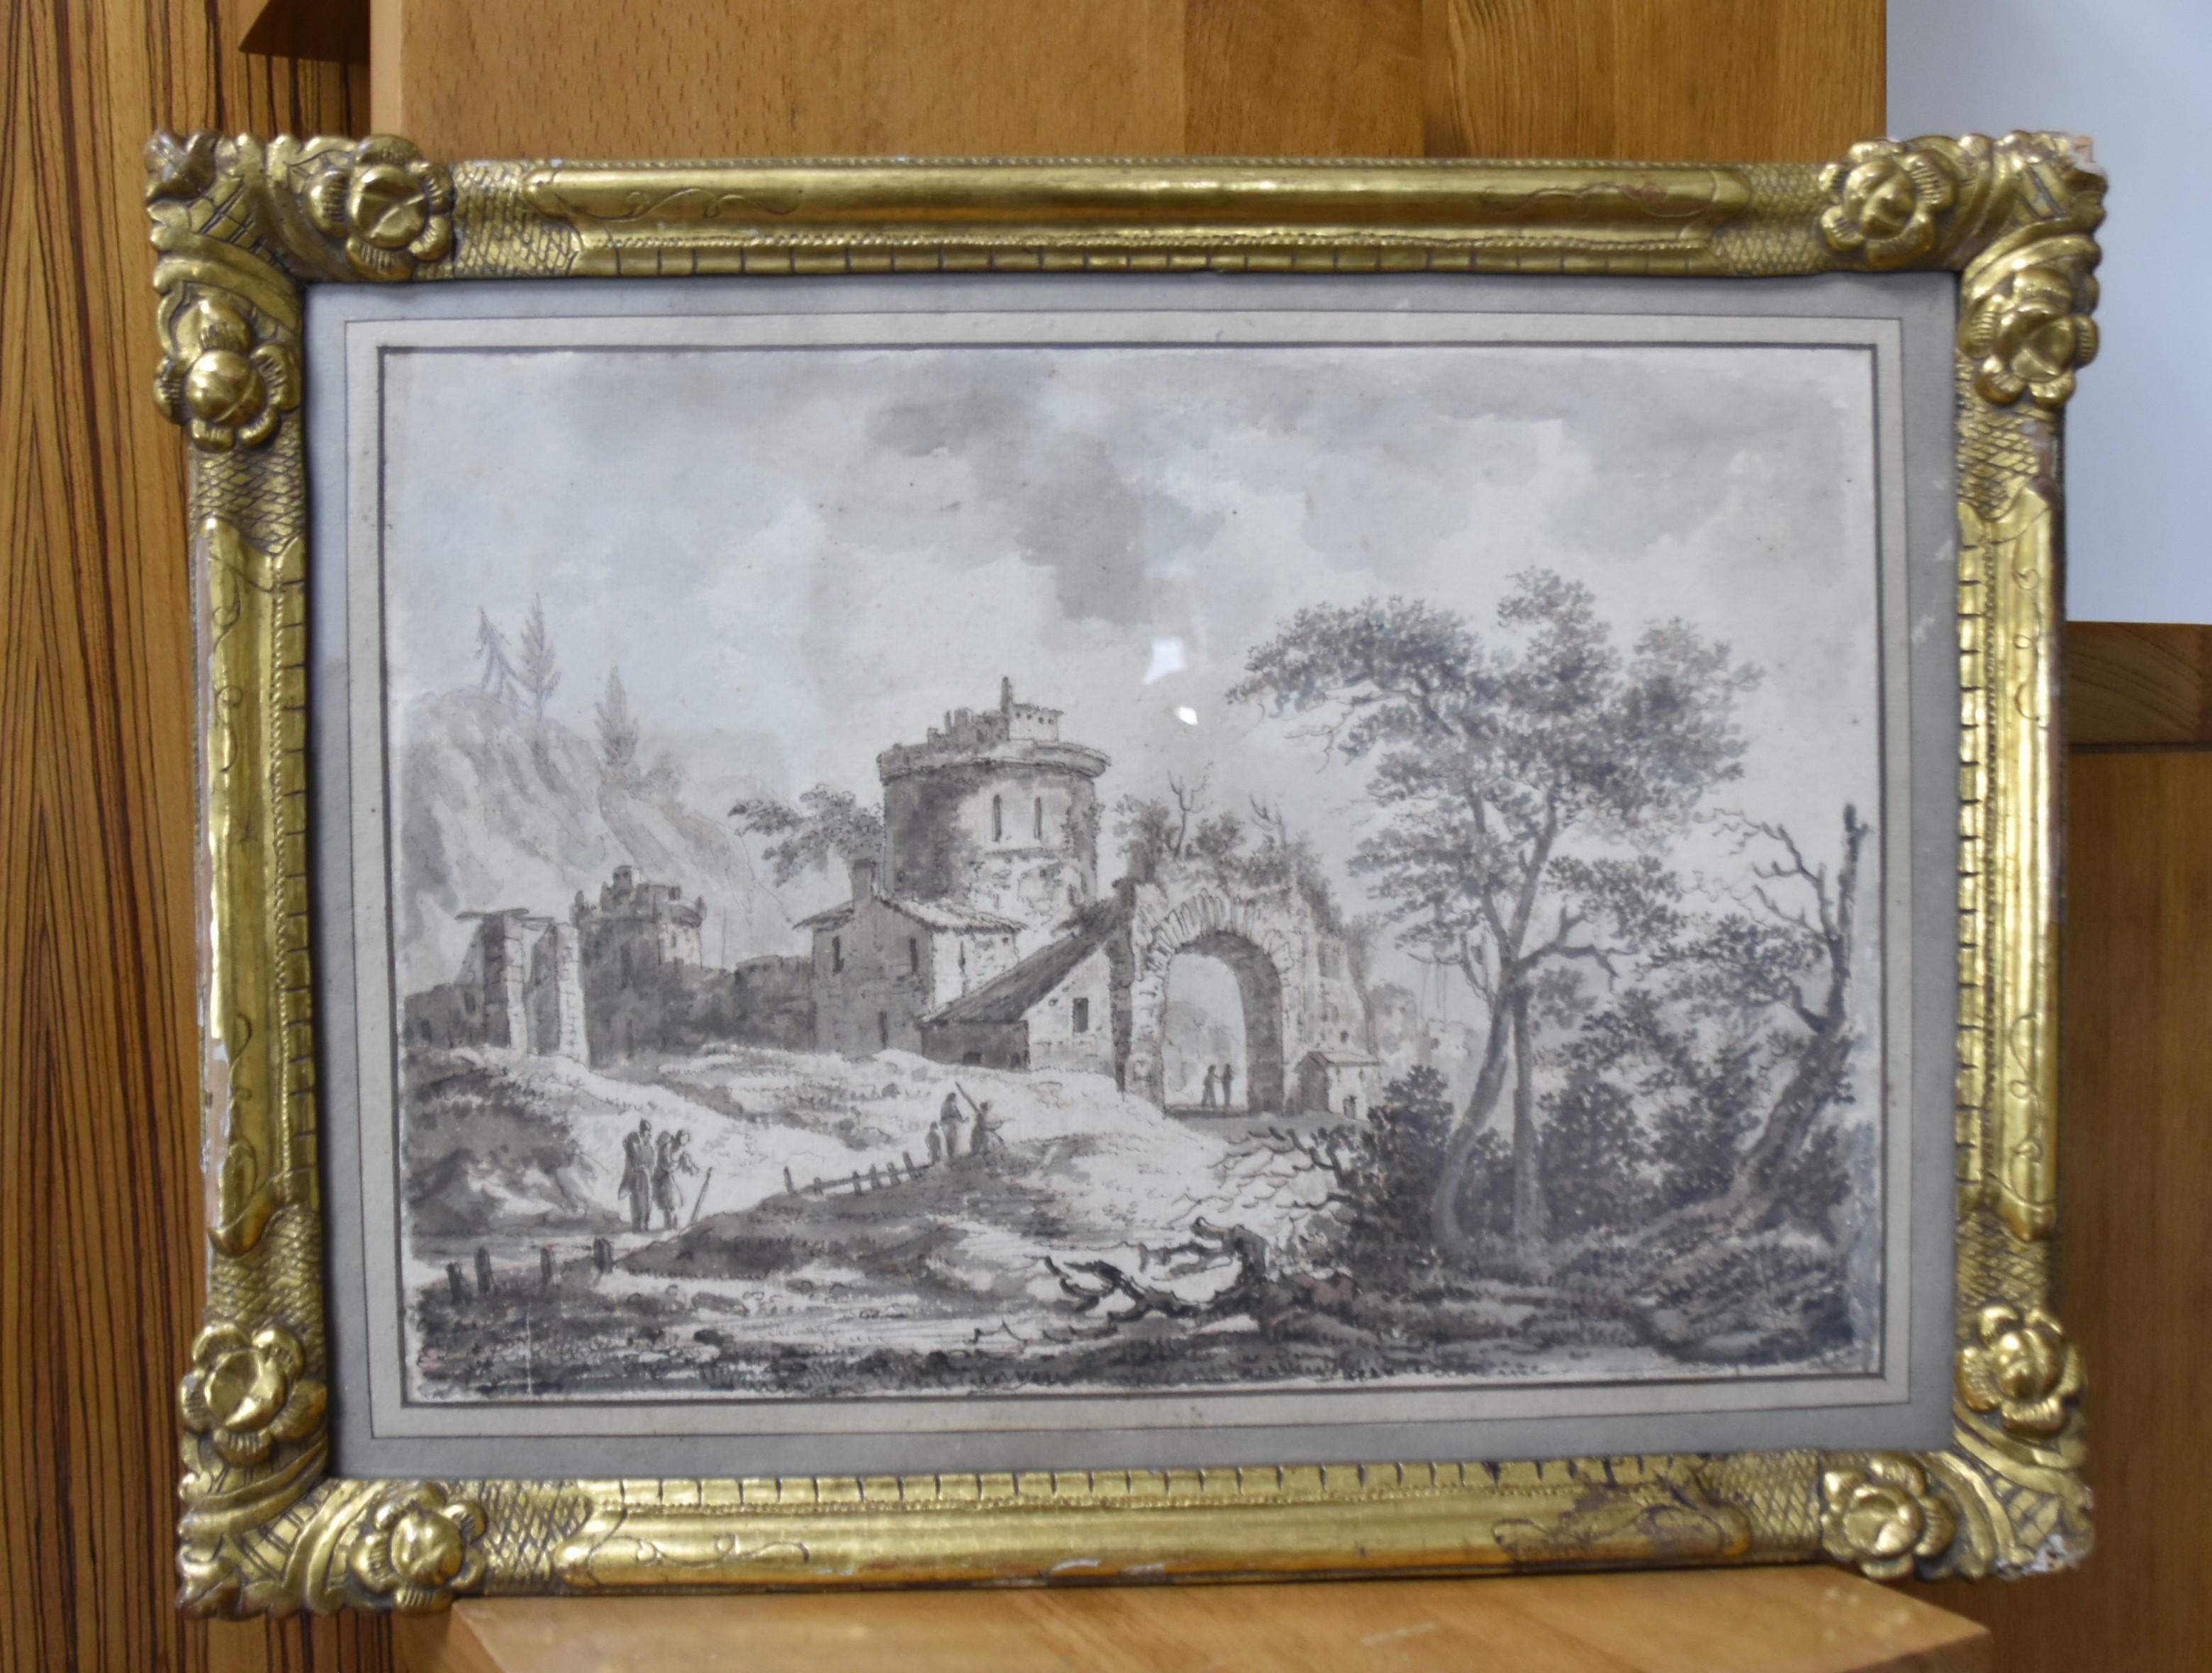 France, 18th Century, View of a fortified village, drawing